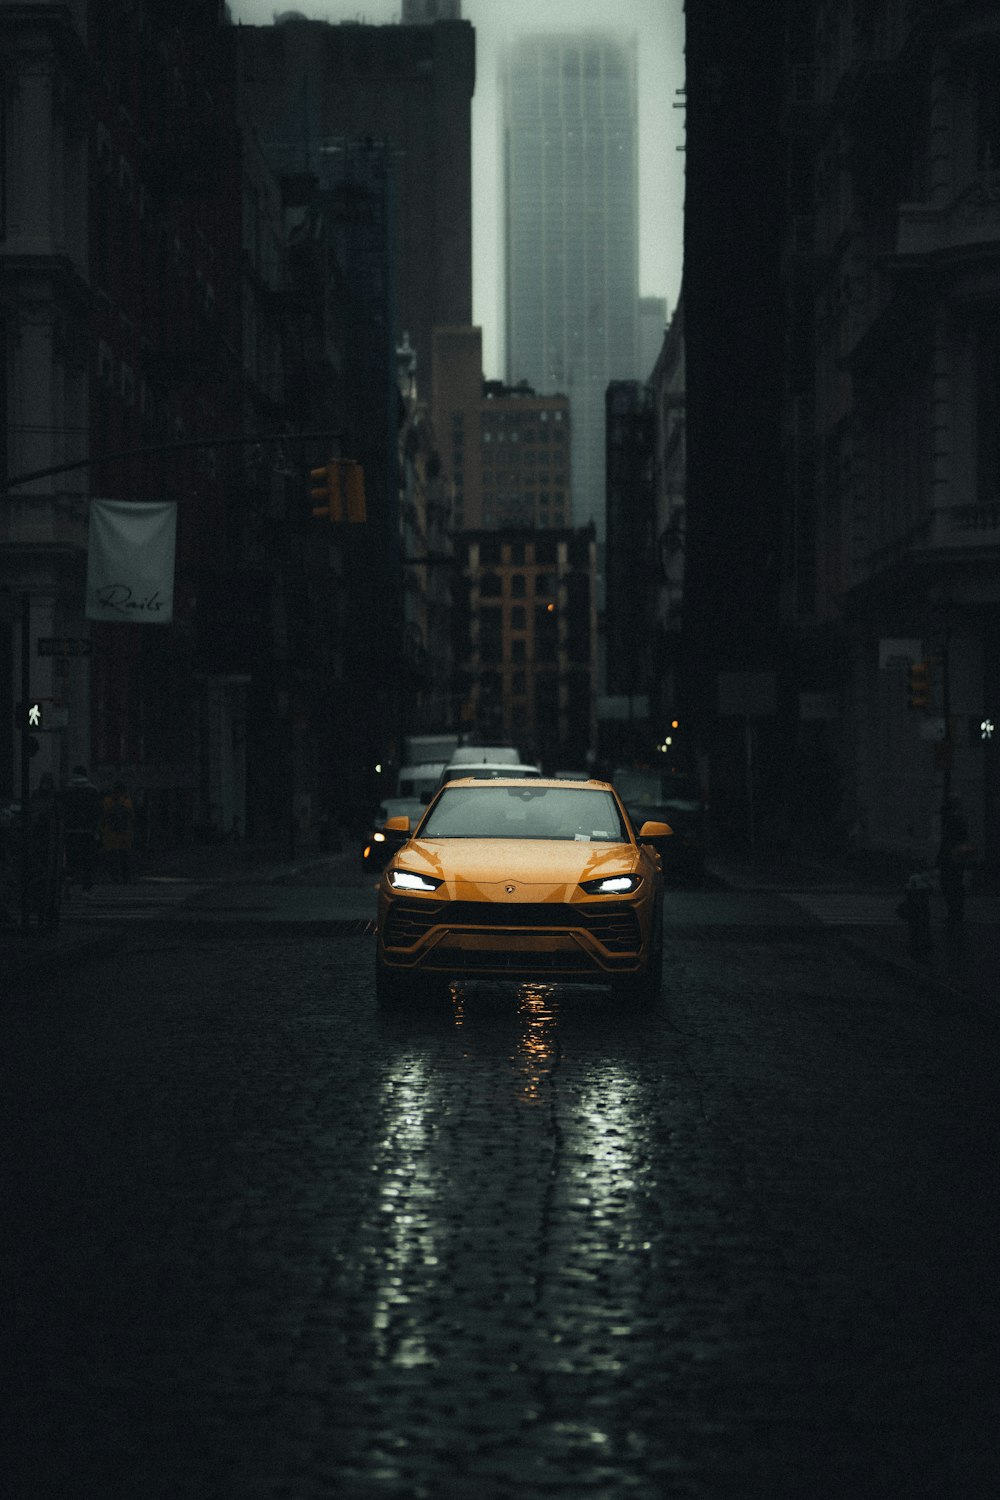 yellow car on road between buildings during night time